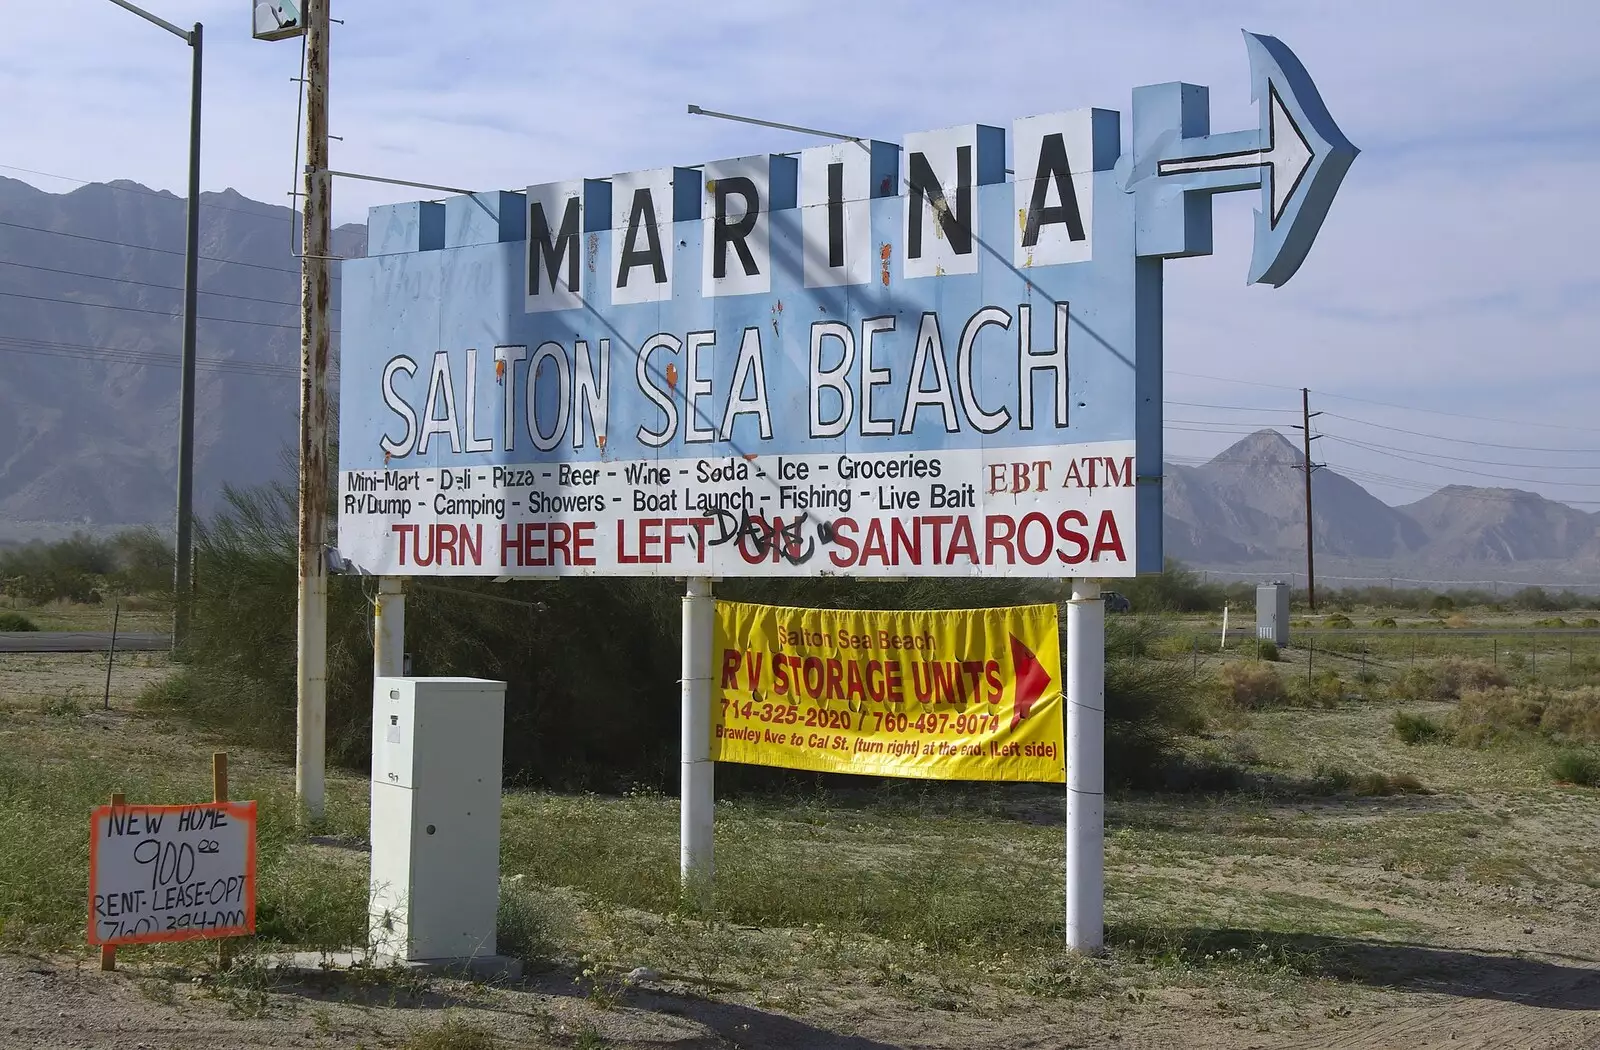 A sign hopes to tempt passers-by to the facilities, from The End of the World: Julian to the Salton Sea and Back, California, US - 1st March 2008